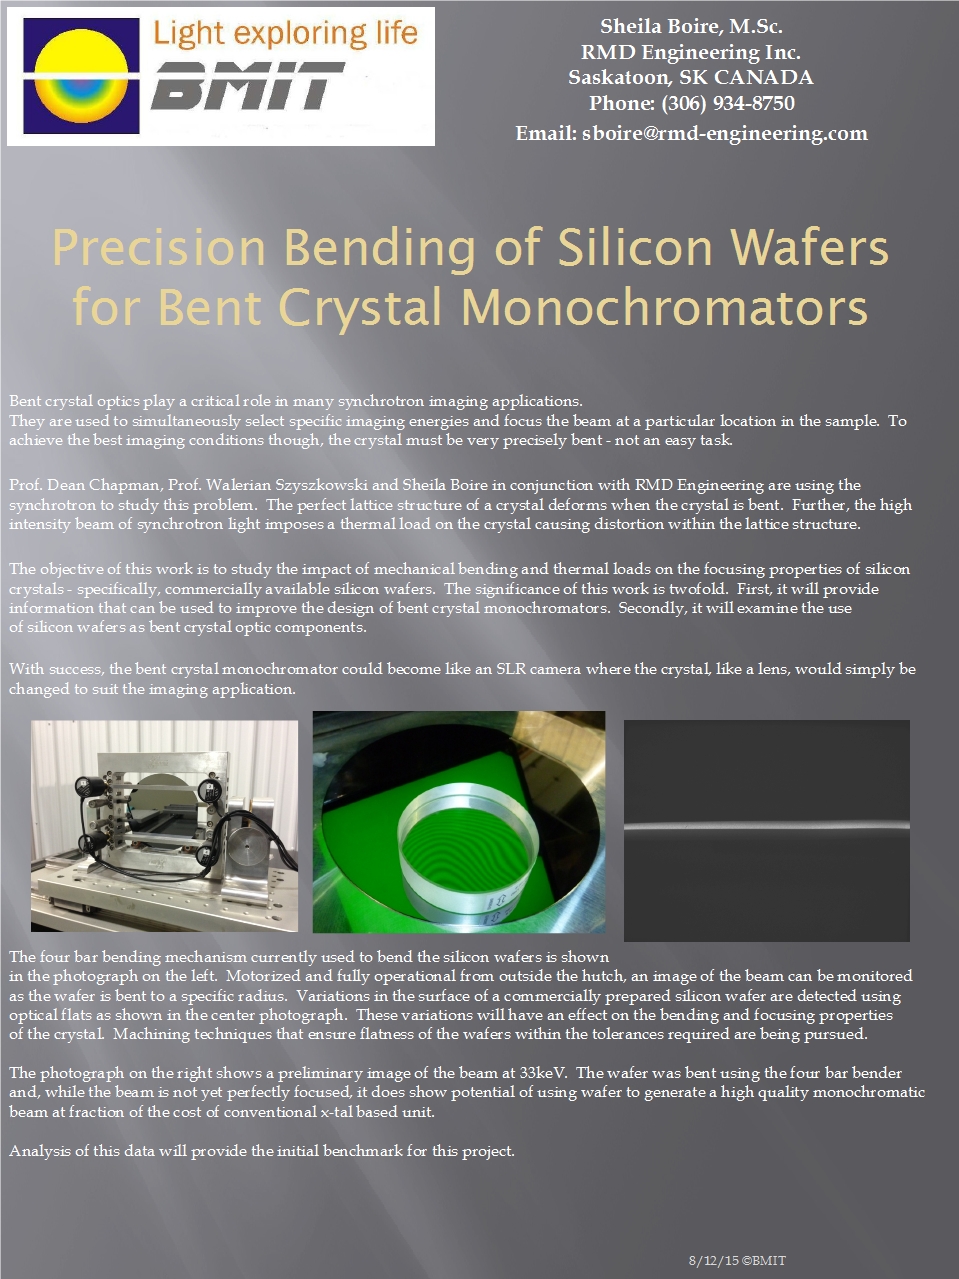 Precision Bending of Silicon Wafers for Bent Crystal Monochromators Image